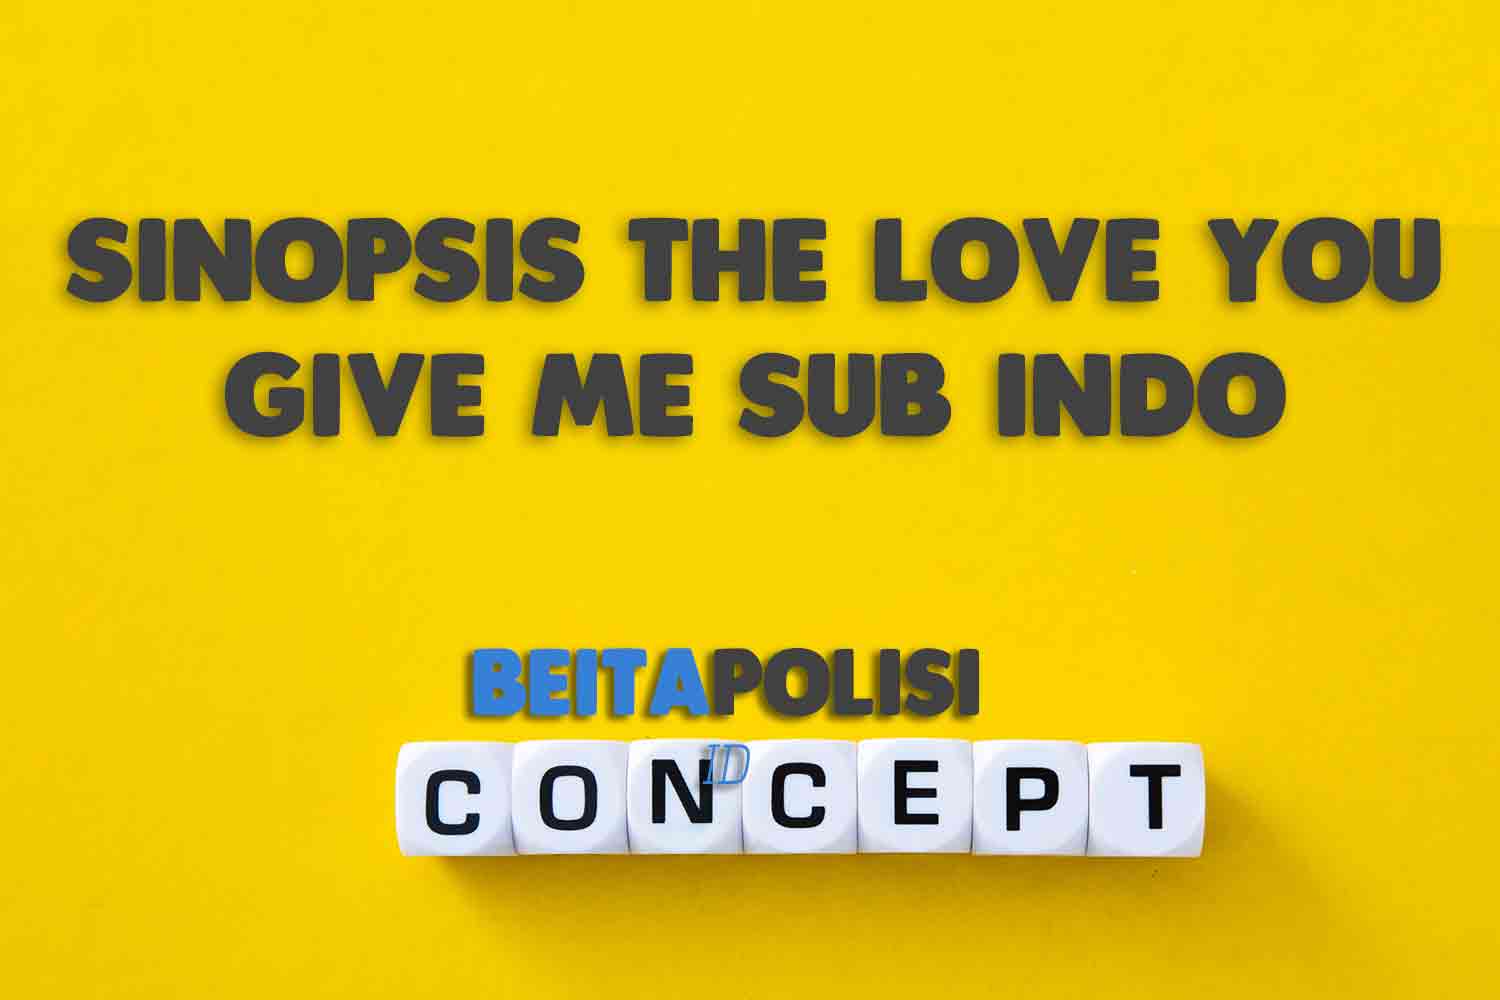 Sinopsis The Love You Give Me Sub Indo Episode 15